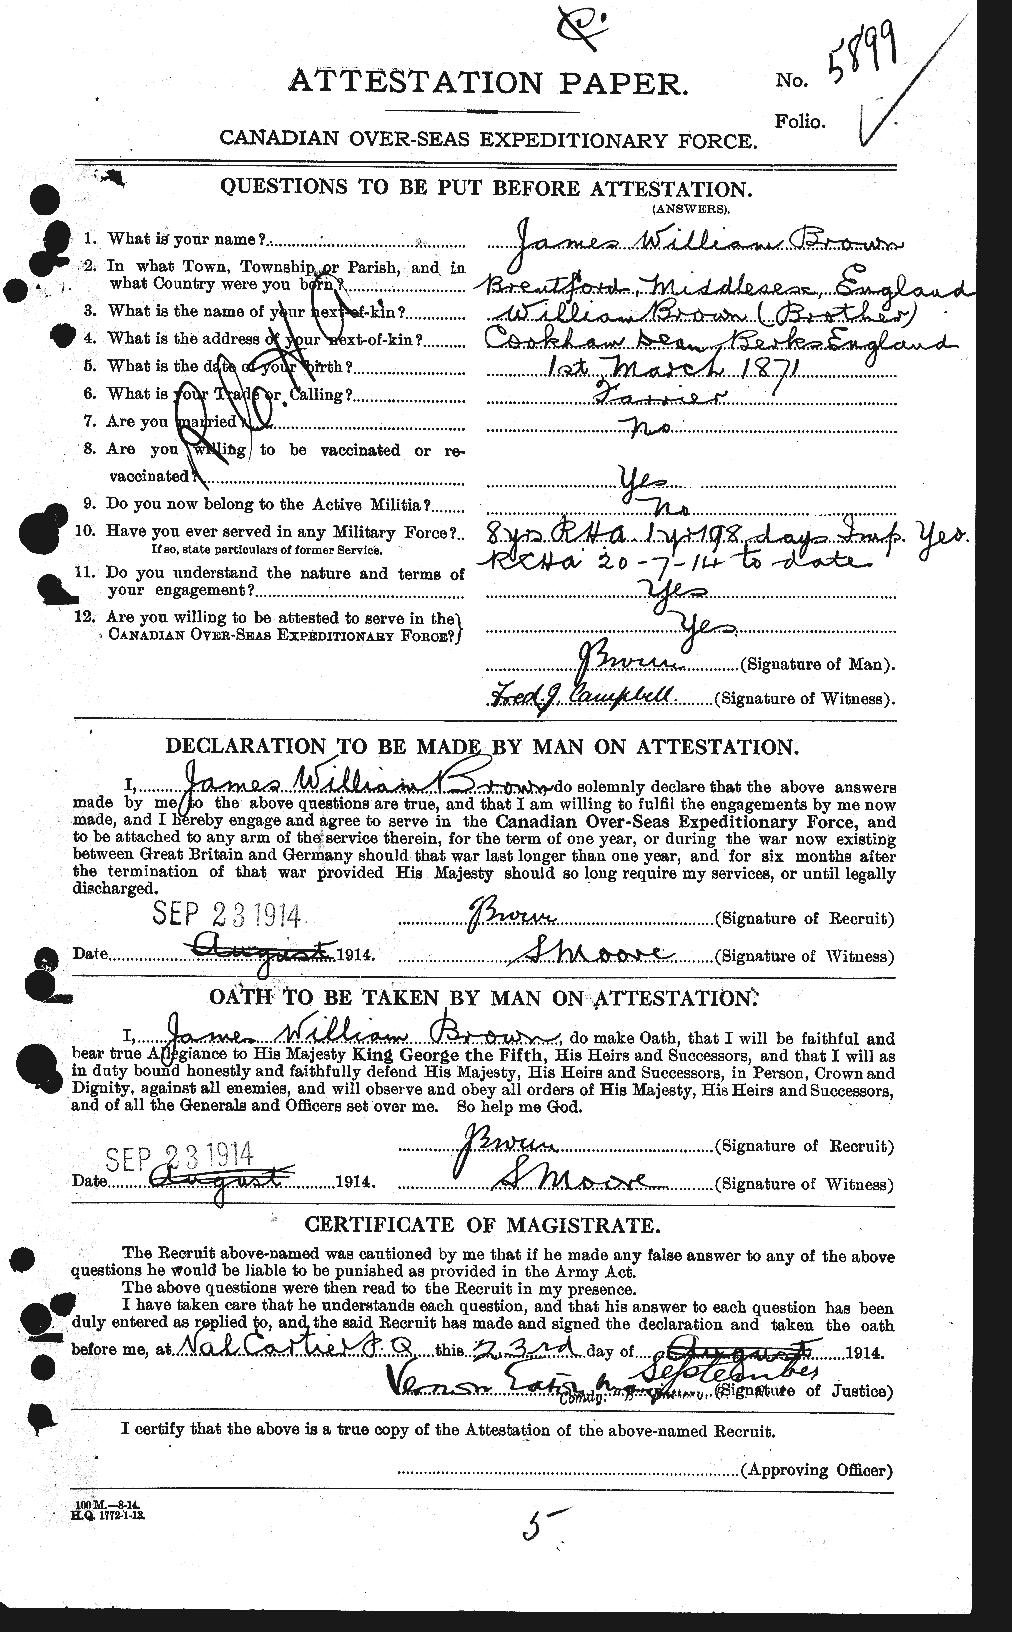 Personnel Records of the First World War - CEF 269602a